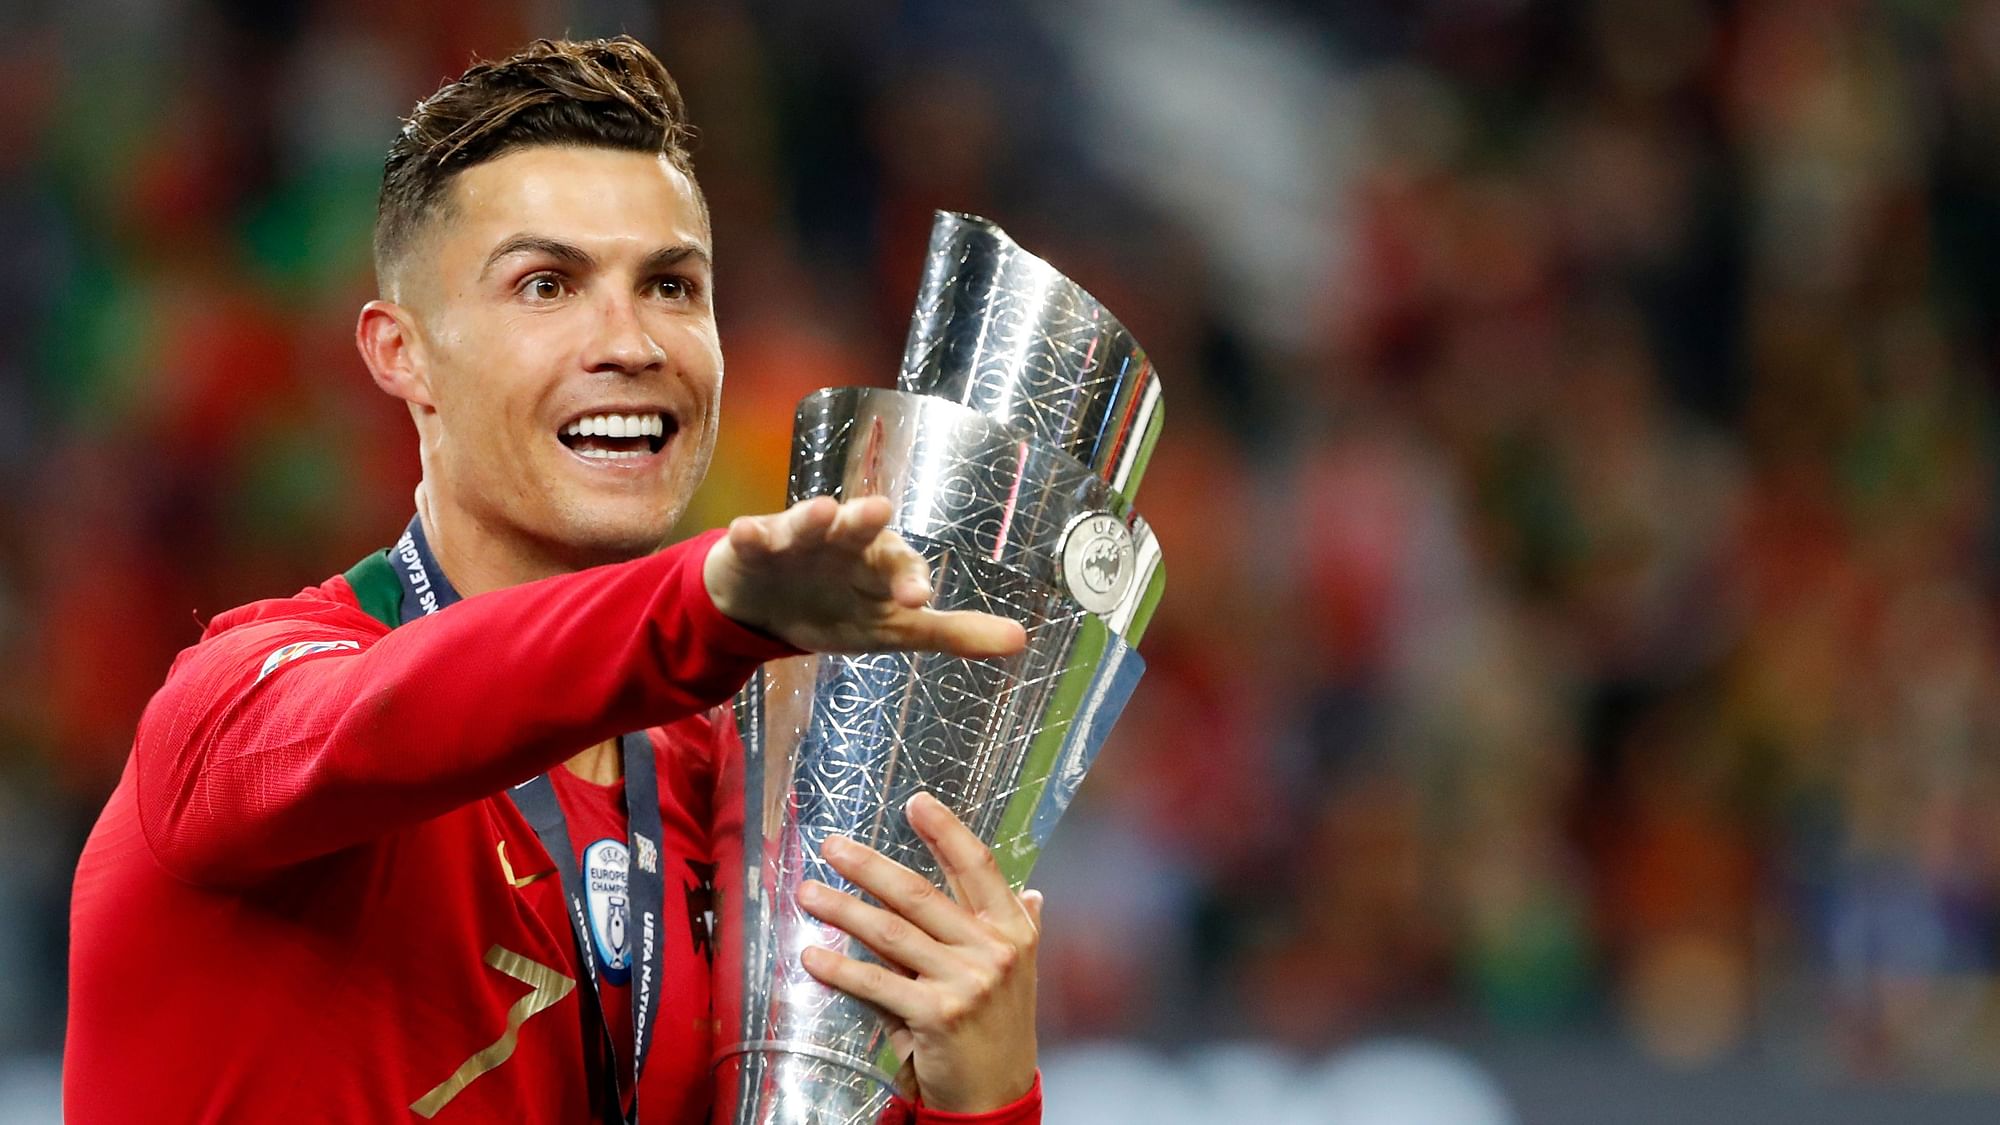 Portugal’s Cristiano Ronaldo gestures as he holds the trophy after defeating the Netherlands 1-0 in the UEFA Nations League final soccer match.